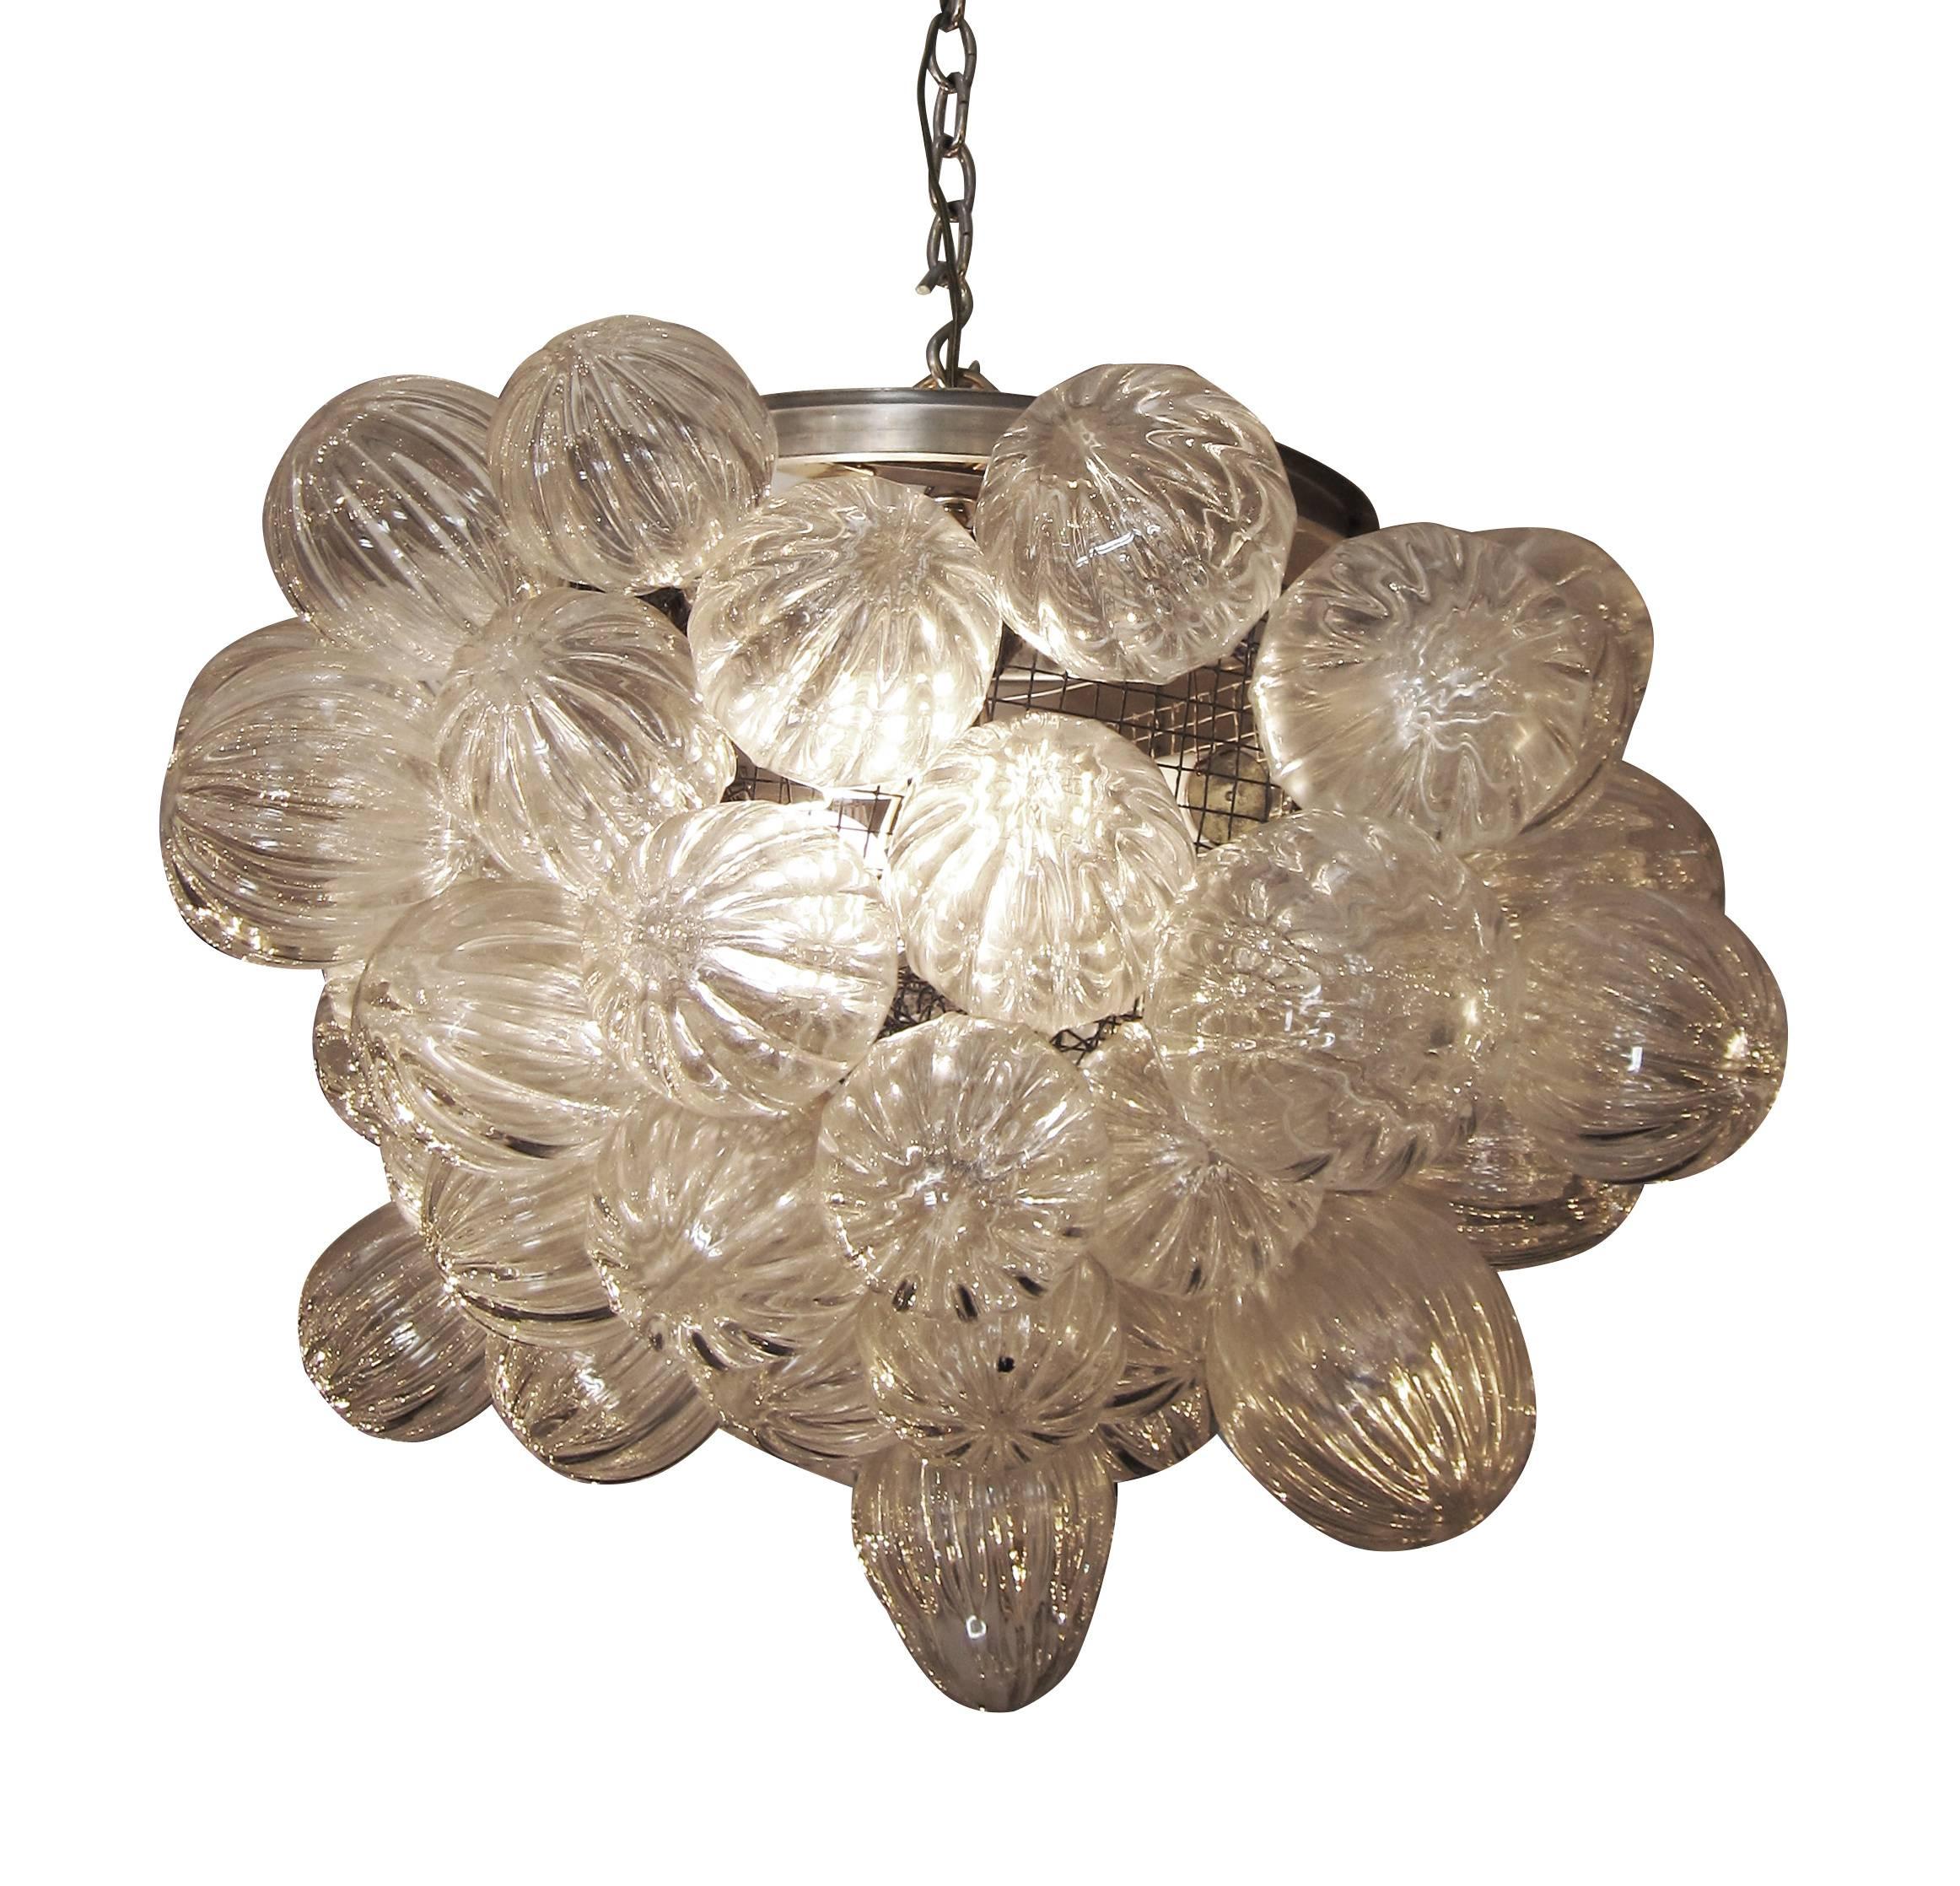 2009 clear hand blown bubble Mid-Century Modern glass pendant light. This item can be viewed at our 302 Bowery location in Manhattan.